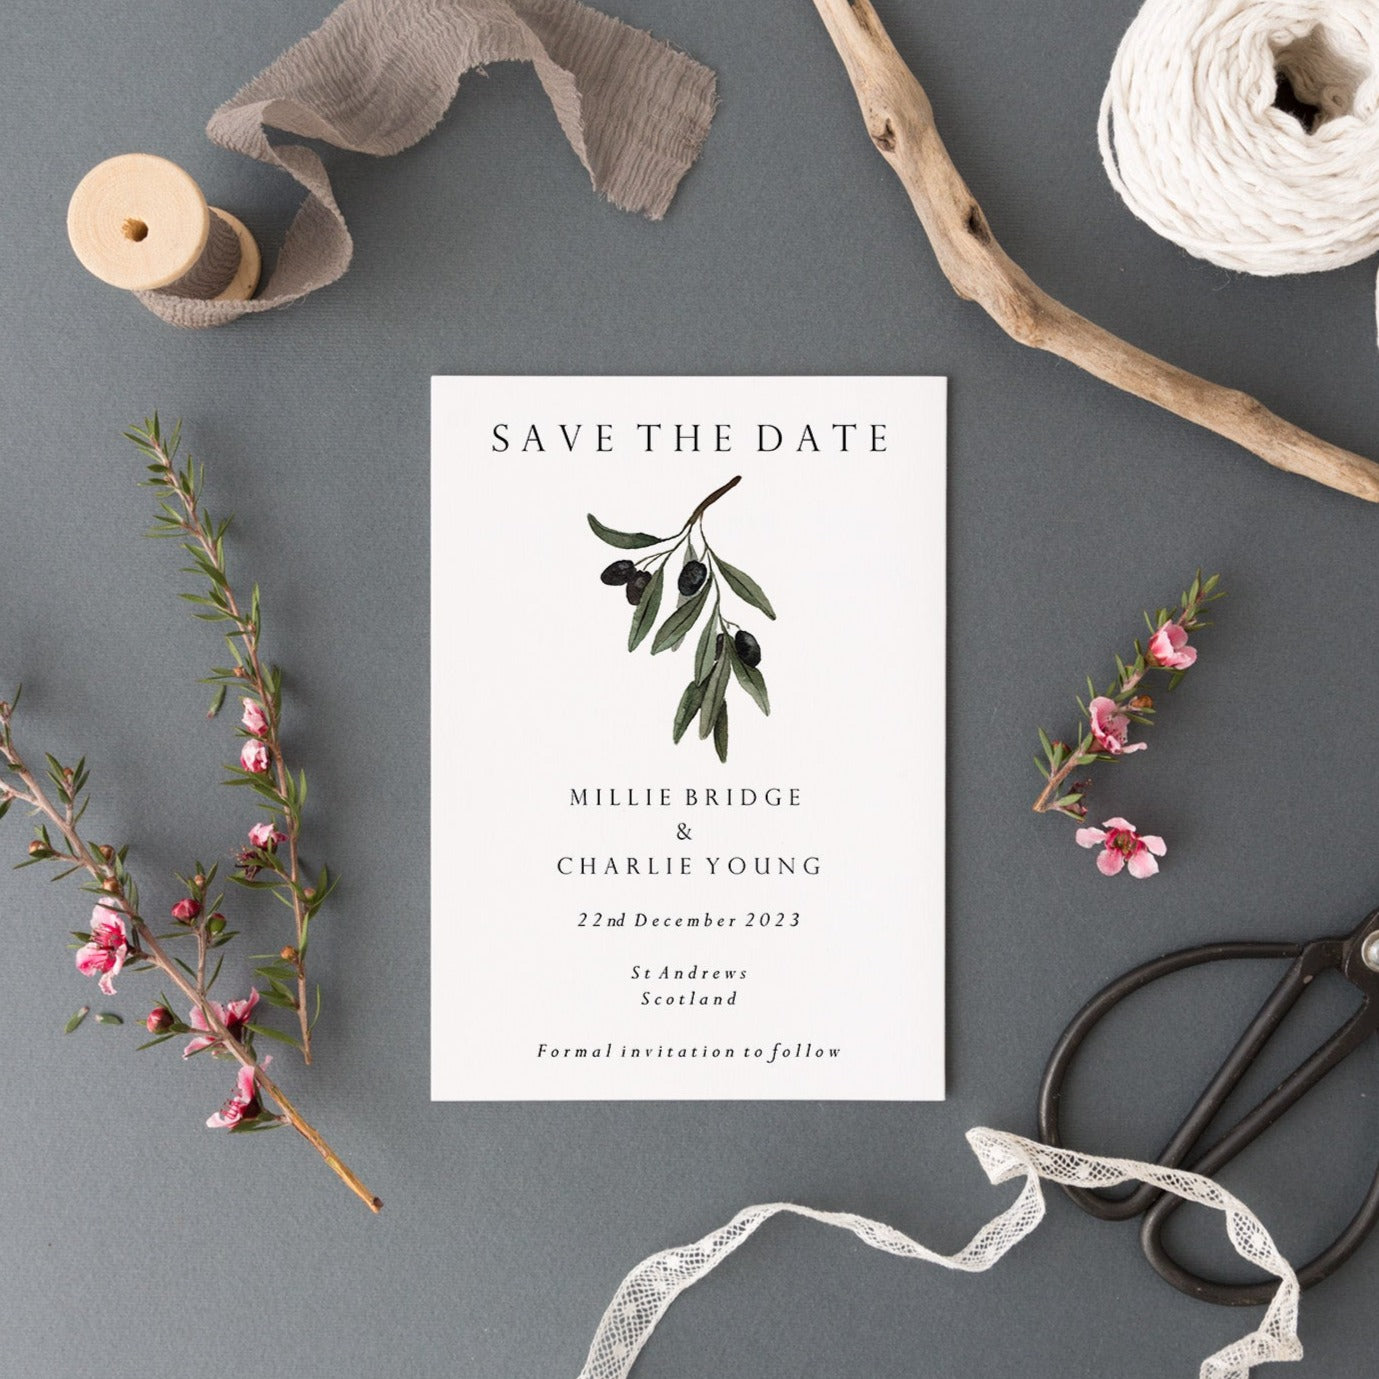 Olive Branch Wedding Save the Date